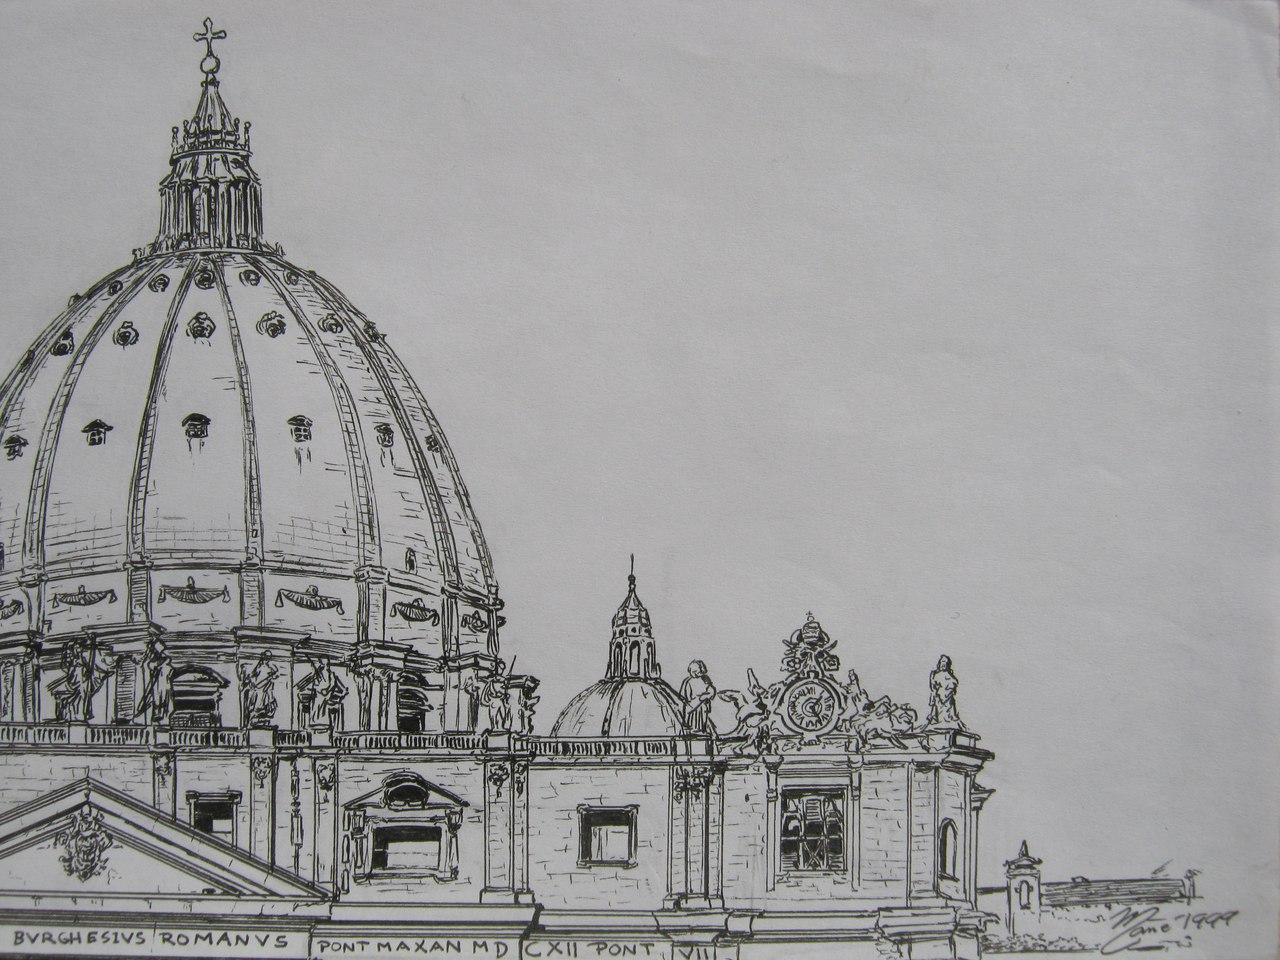 Interior & Exterior field sketch of St. Peter's Basilica at the Vatican in  Rome, Italy - If you ever have the chance to visit Rome, you muuuuuuust!  visit this place! It's pure